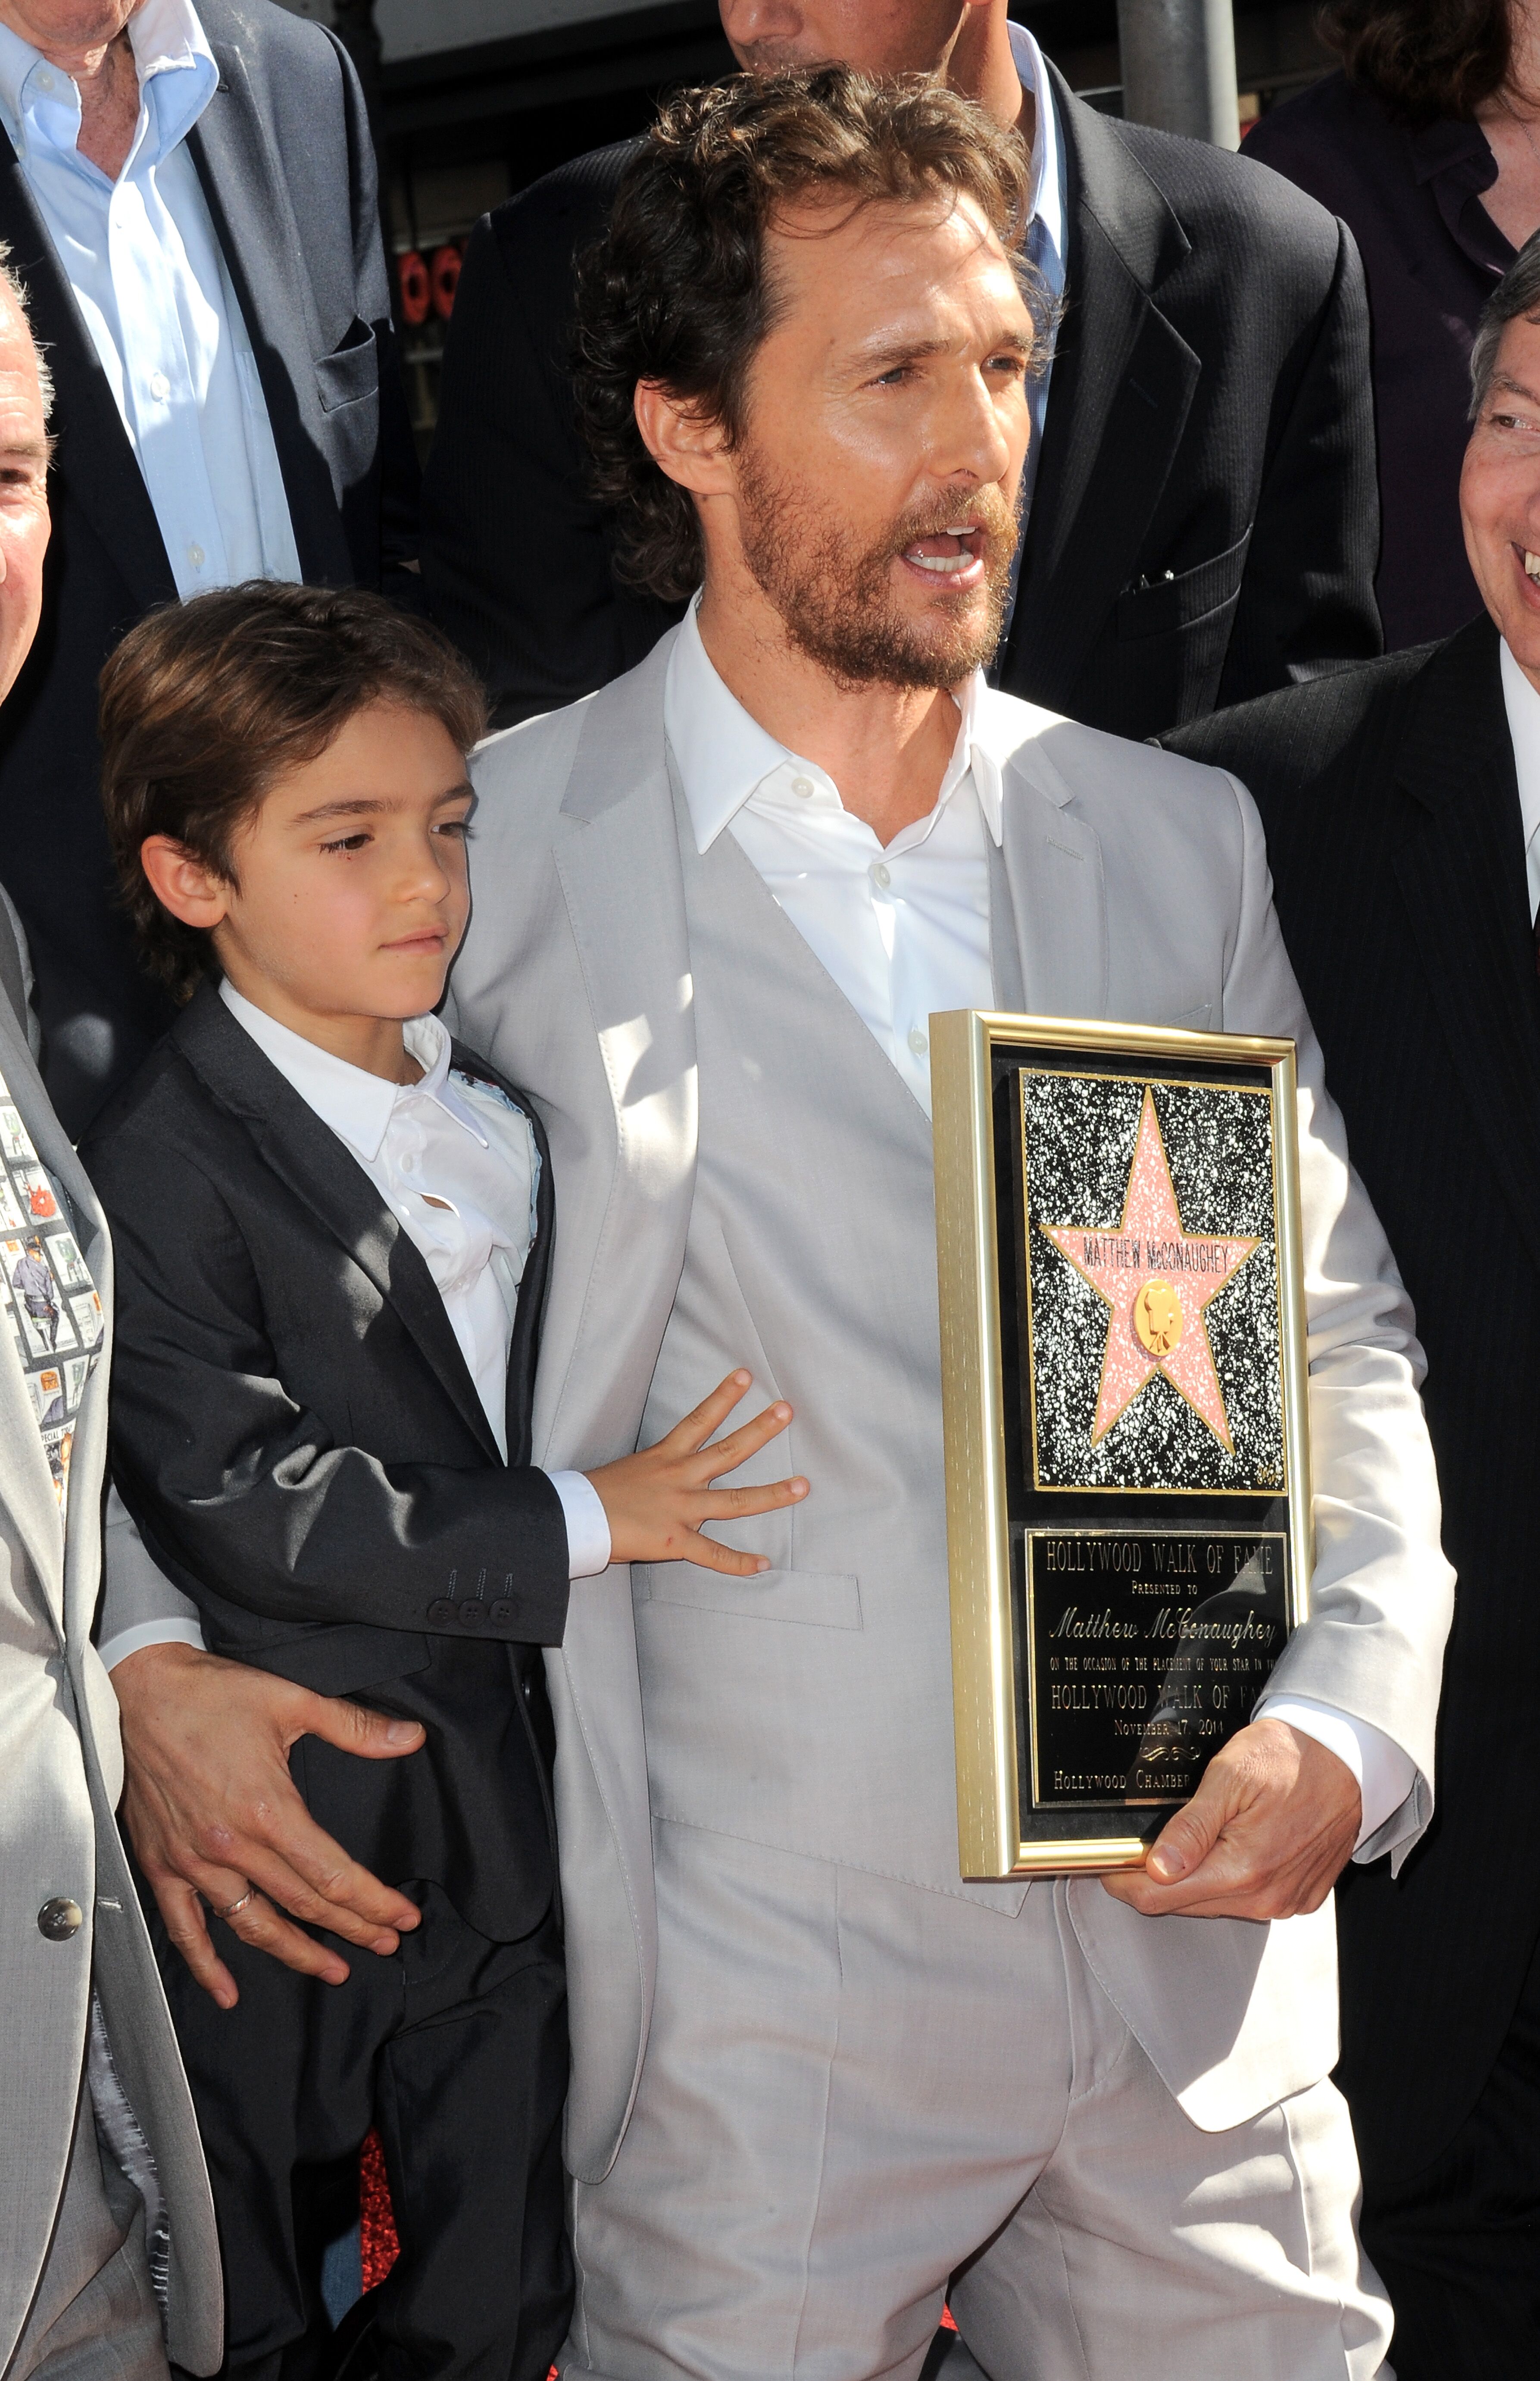 Matthew McConnaughey and son Levi at Matthew McConaughey's Star ceremony On The Hollywood Walk Of Fame on November 17, 2014 in Hollywood, California. | Source: Getty Images